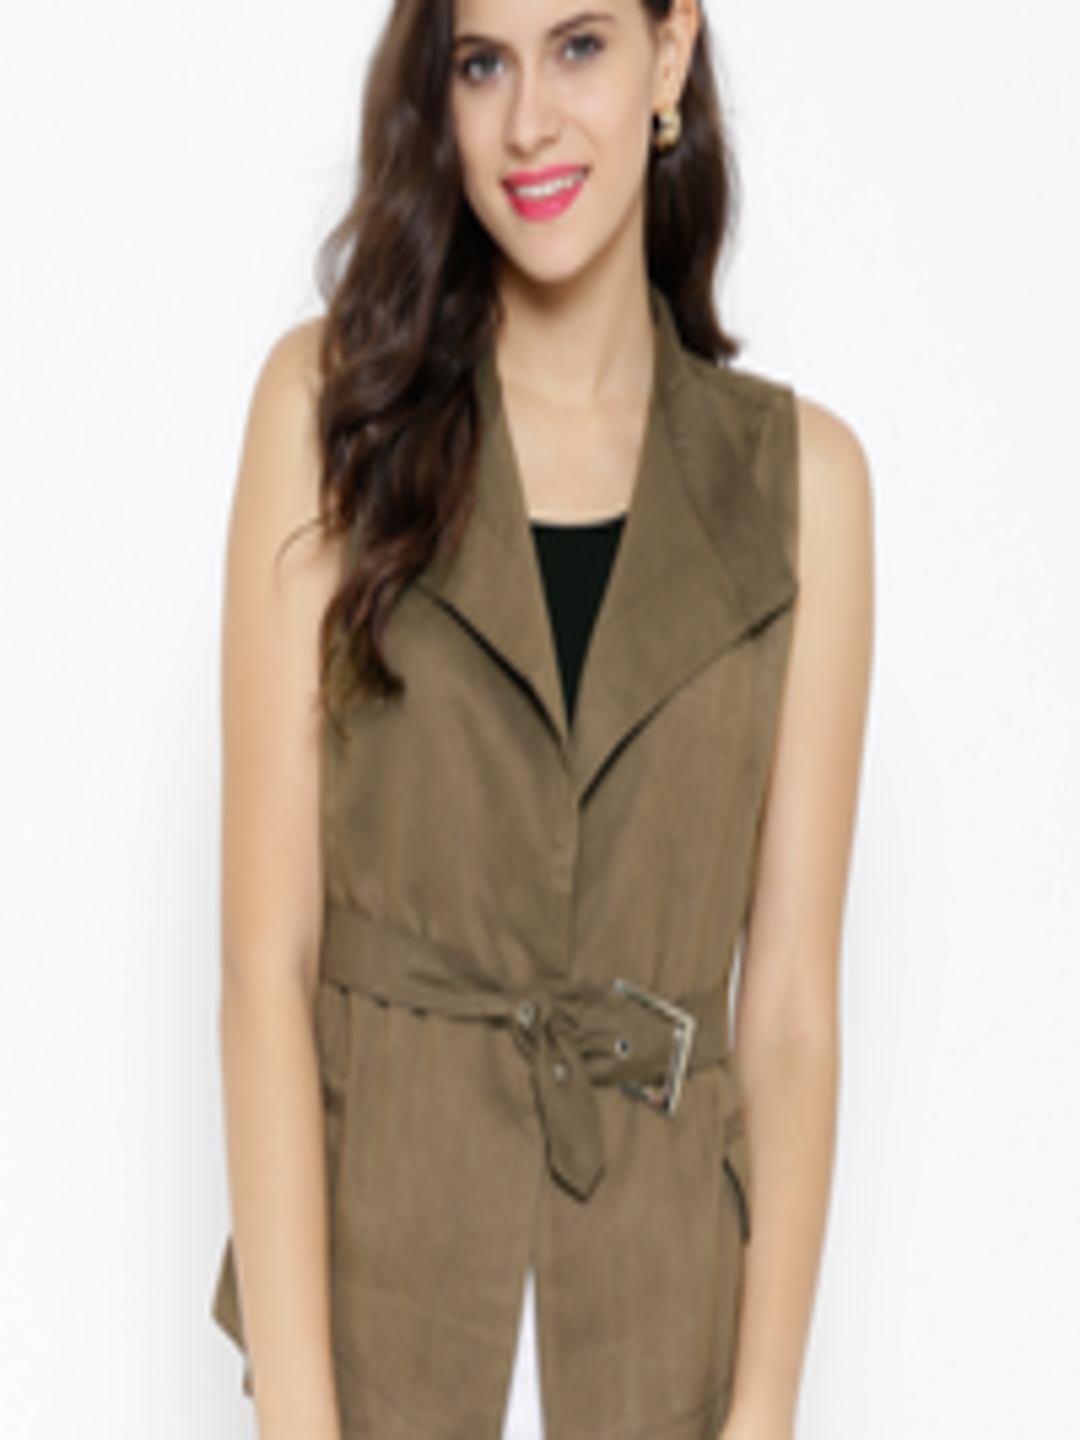 Olive green sleeveless jackets for women red and white floral print blouse